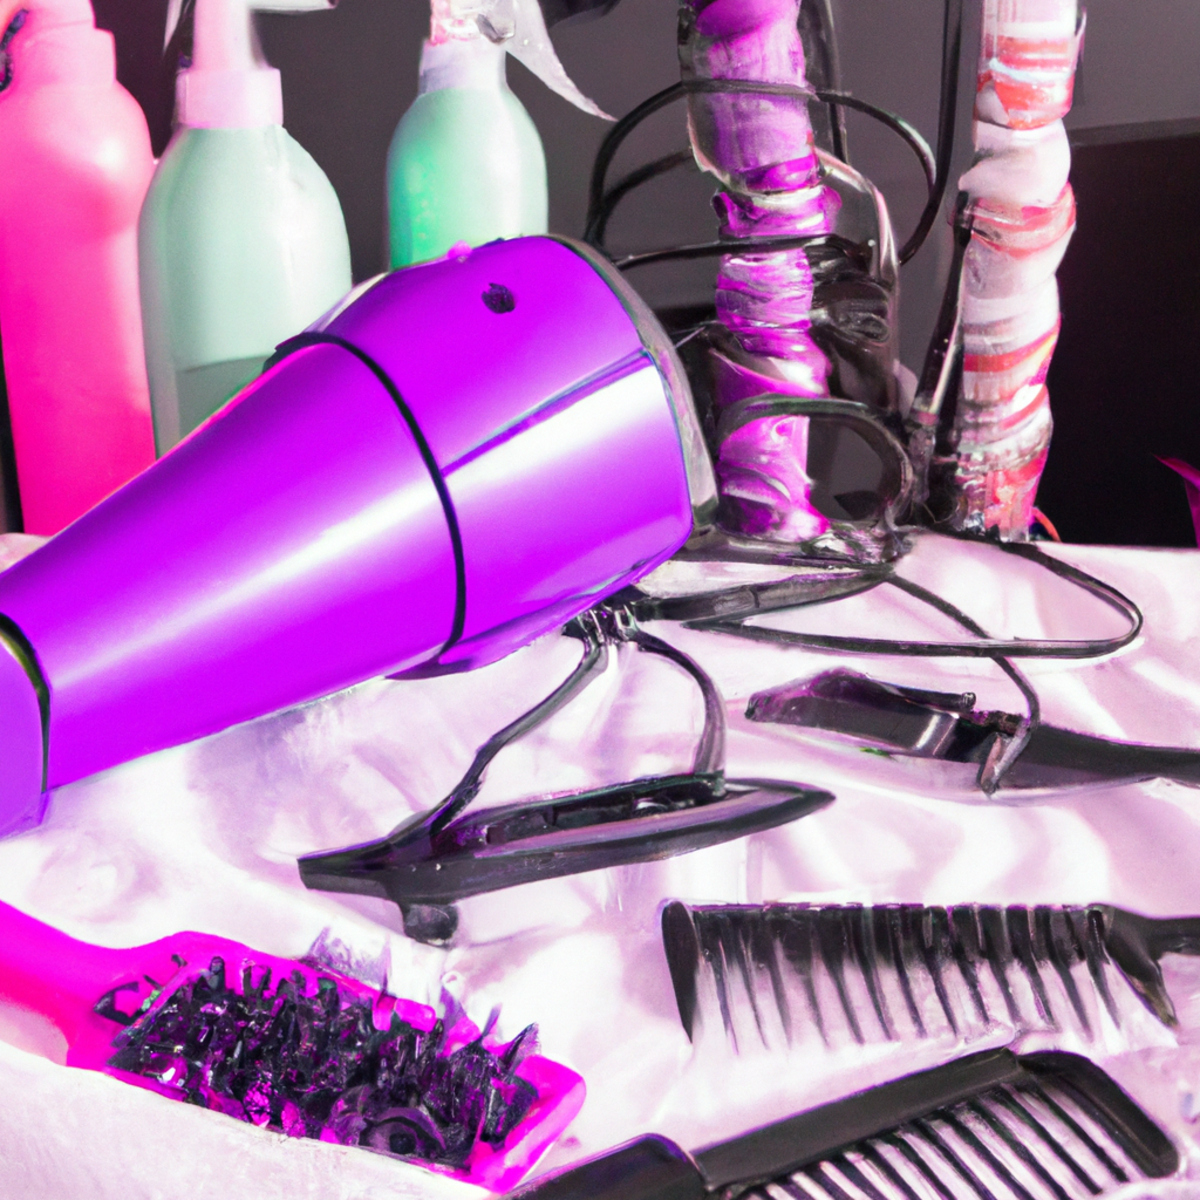 Trending hairstyles for 2023 - A colorful collection of hair styling tools and accessories arranged in an artful display, showcasing the latest trends for 2023.